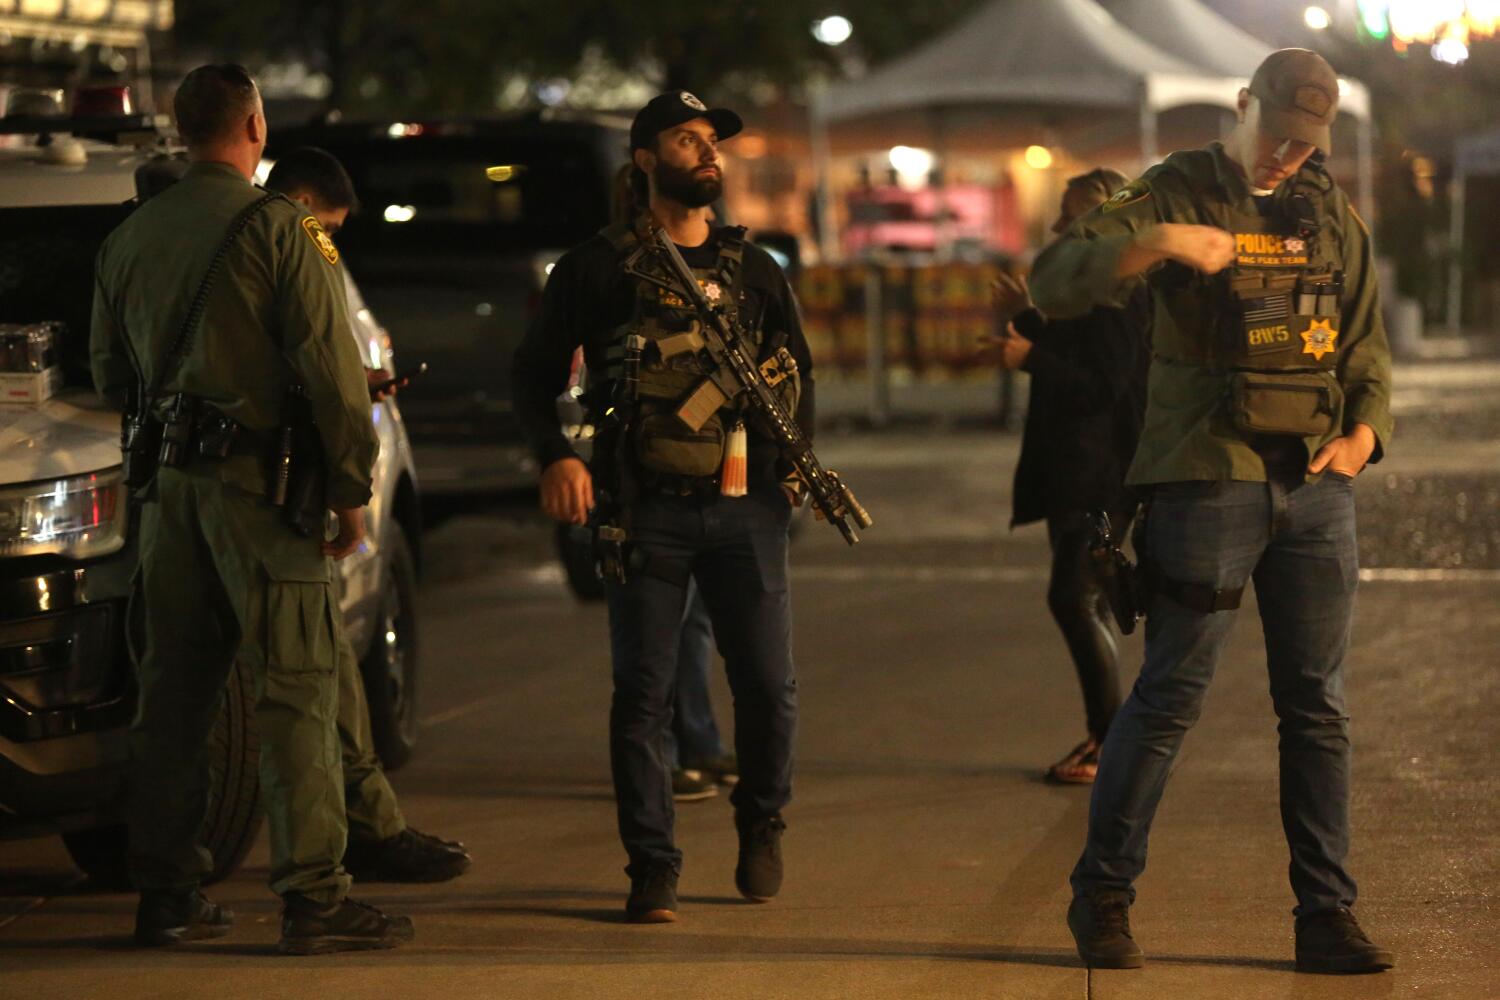 UNLV and city of Las Vegas reeling after campus mass shooting, an echo of an earlier tragedy